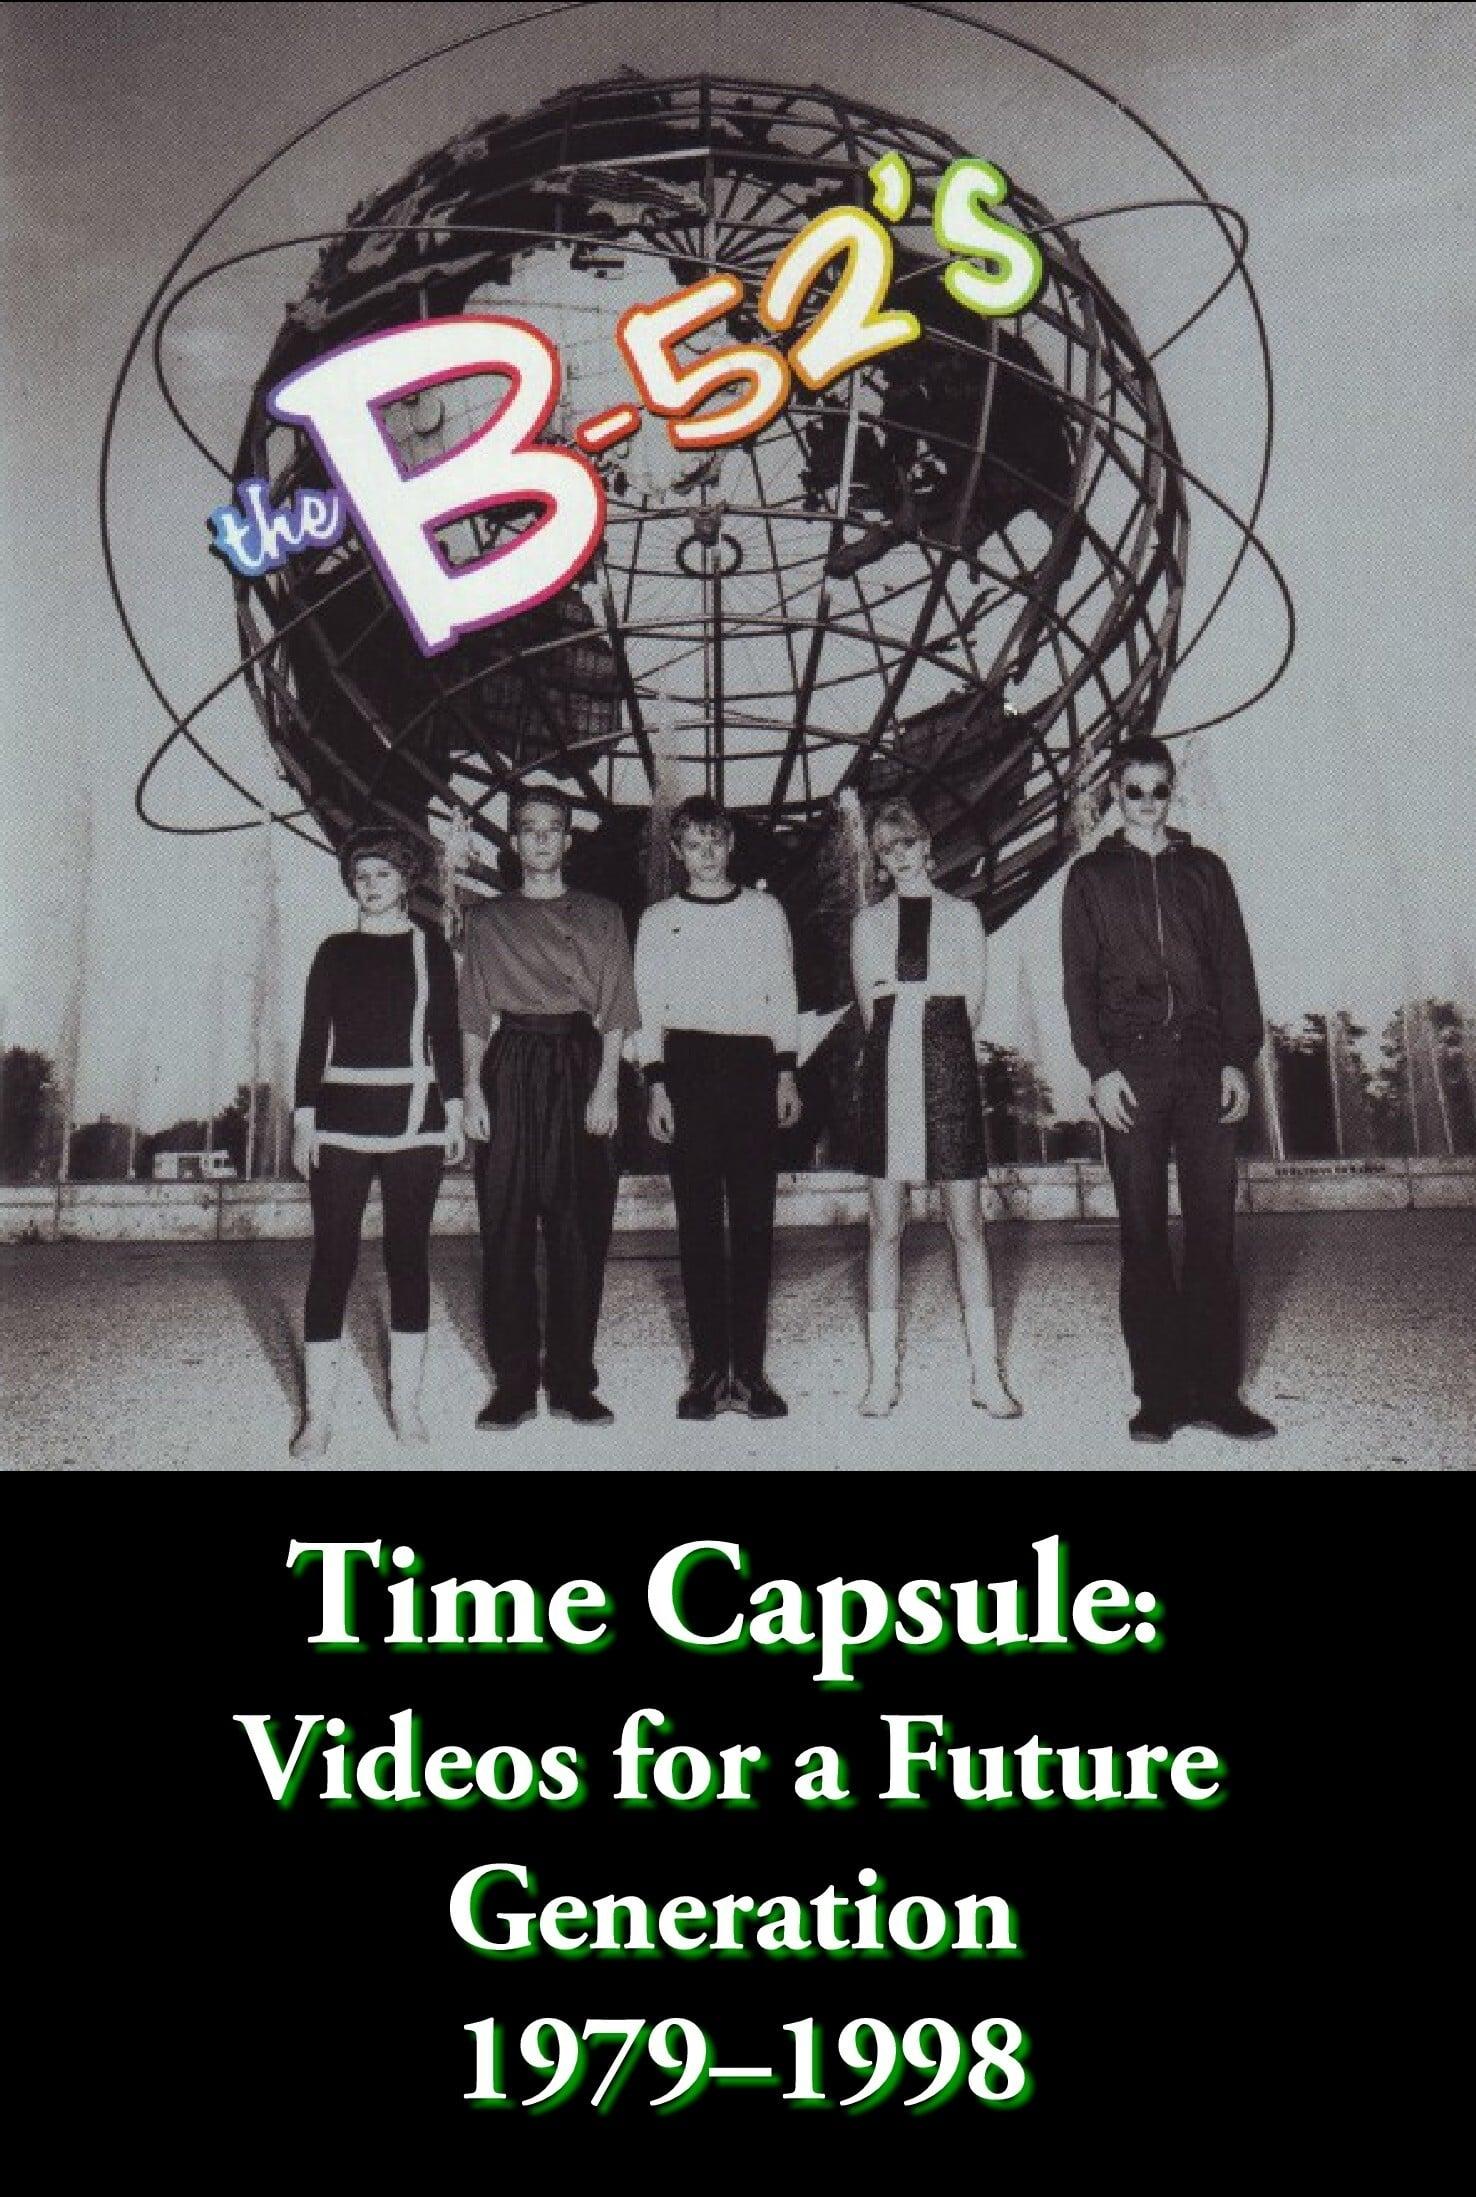 The B-52's Time Capsule: Videos for a Future Generation poster